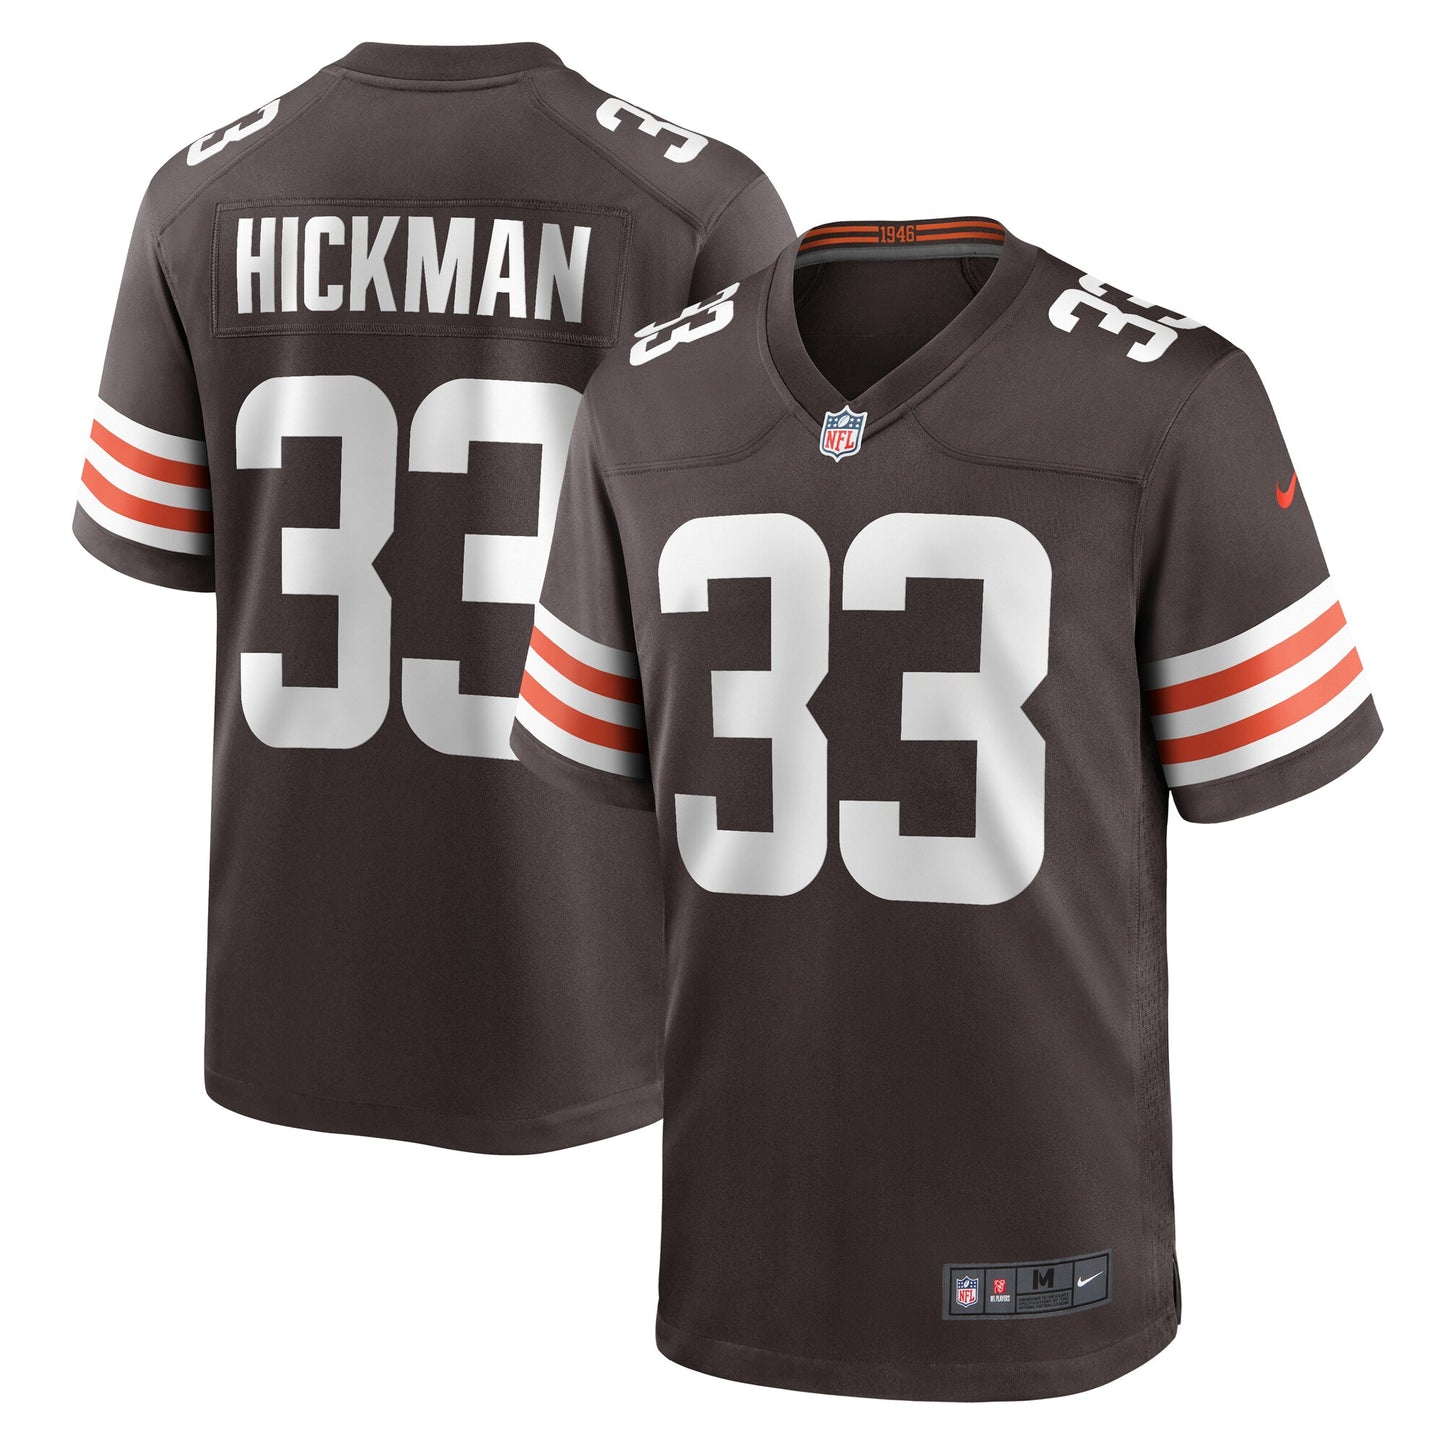 Ronnie Hickman Cleveland Browns Nike Team Game Jersey -  Brown